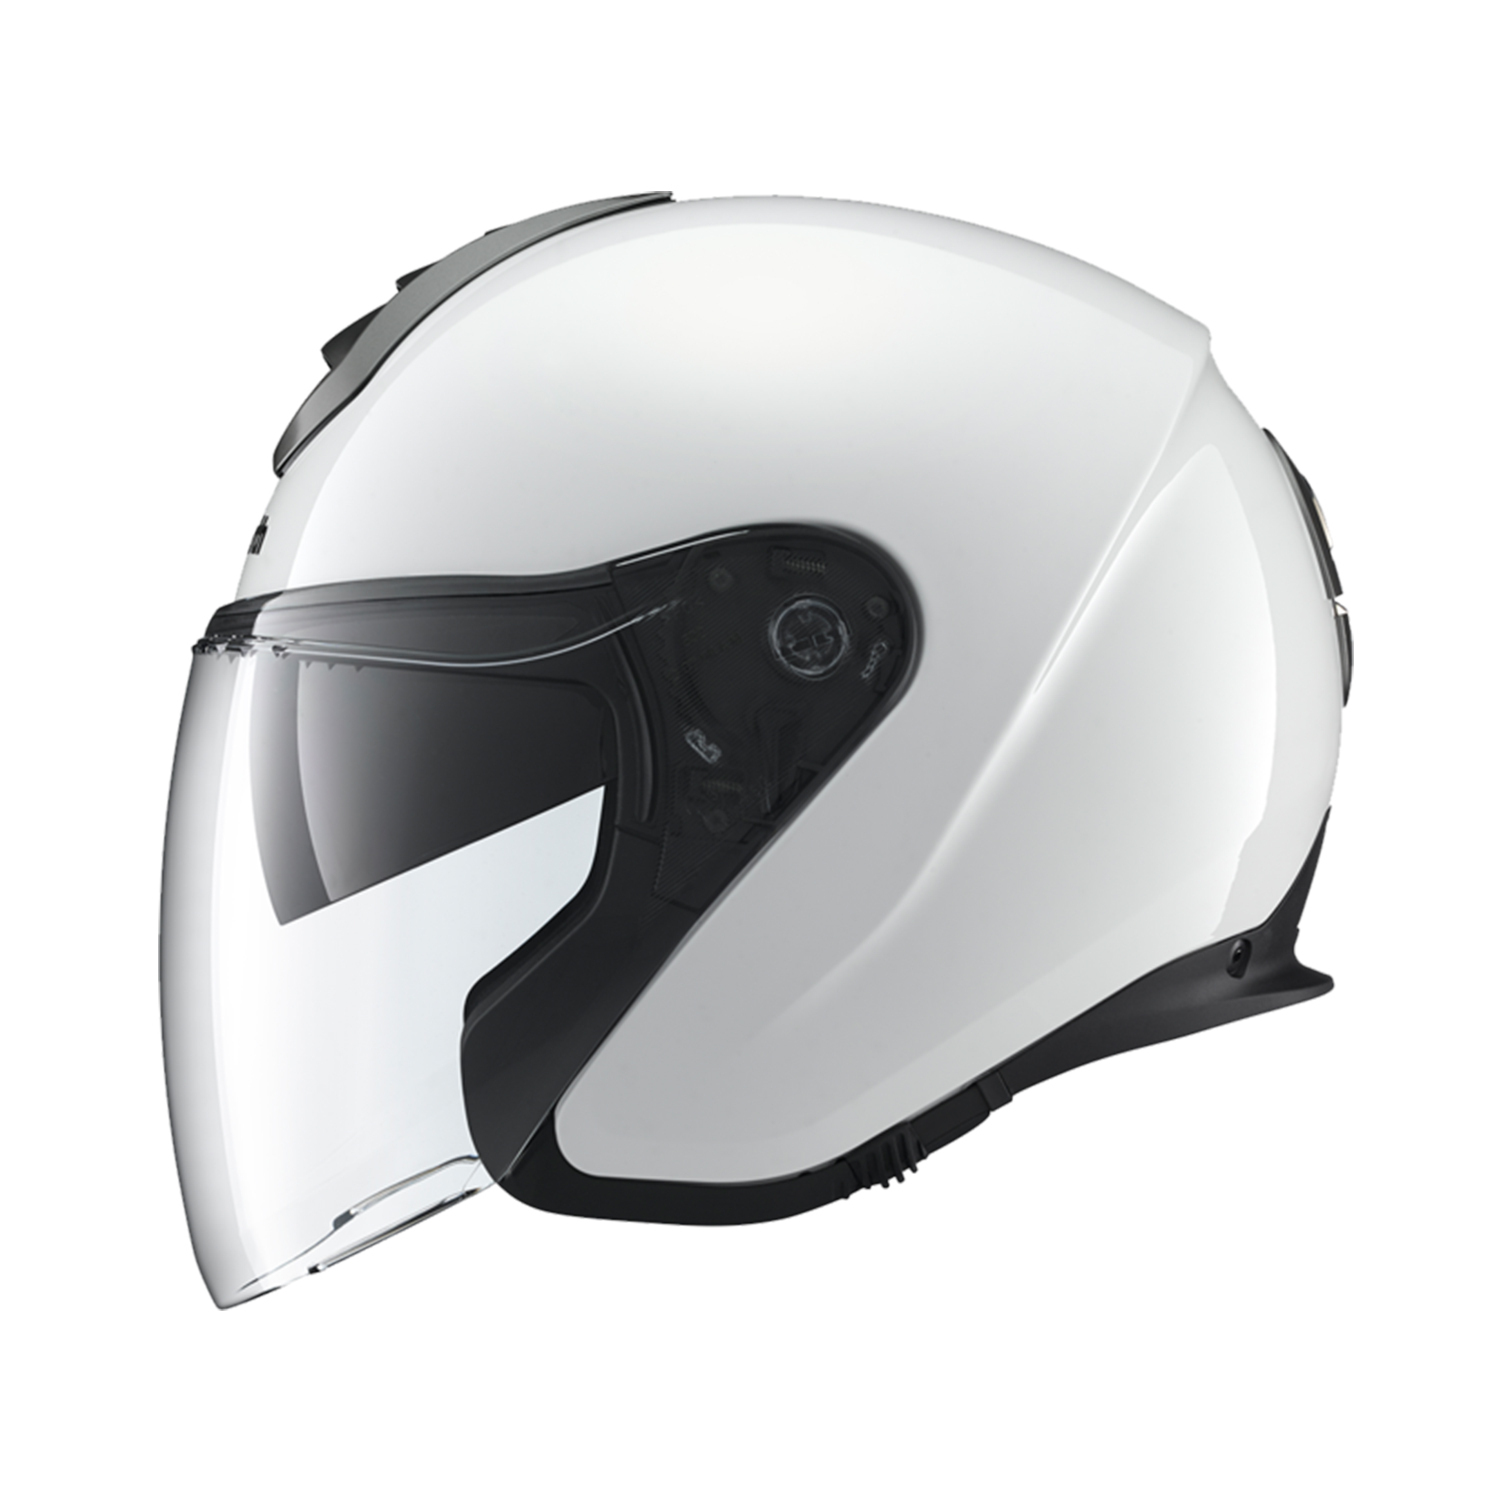 Schuberth M1 Helmet Vienna White - Available in Various Sizes